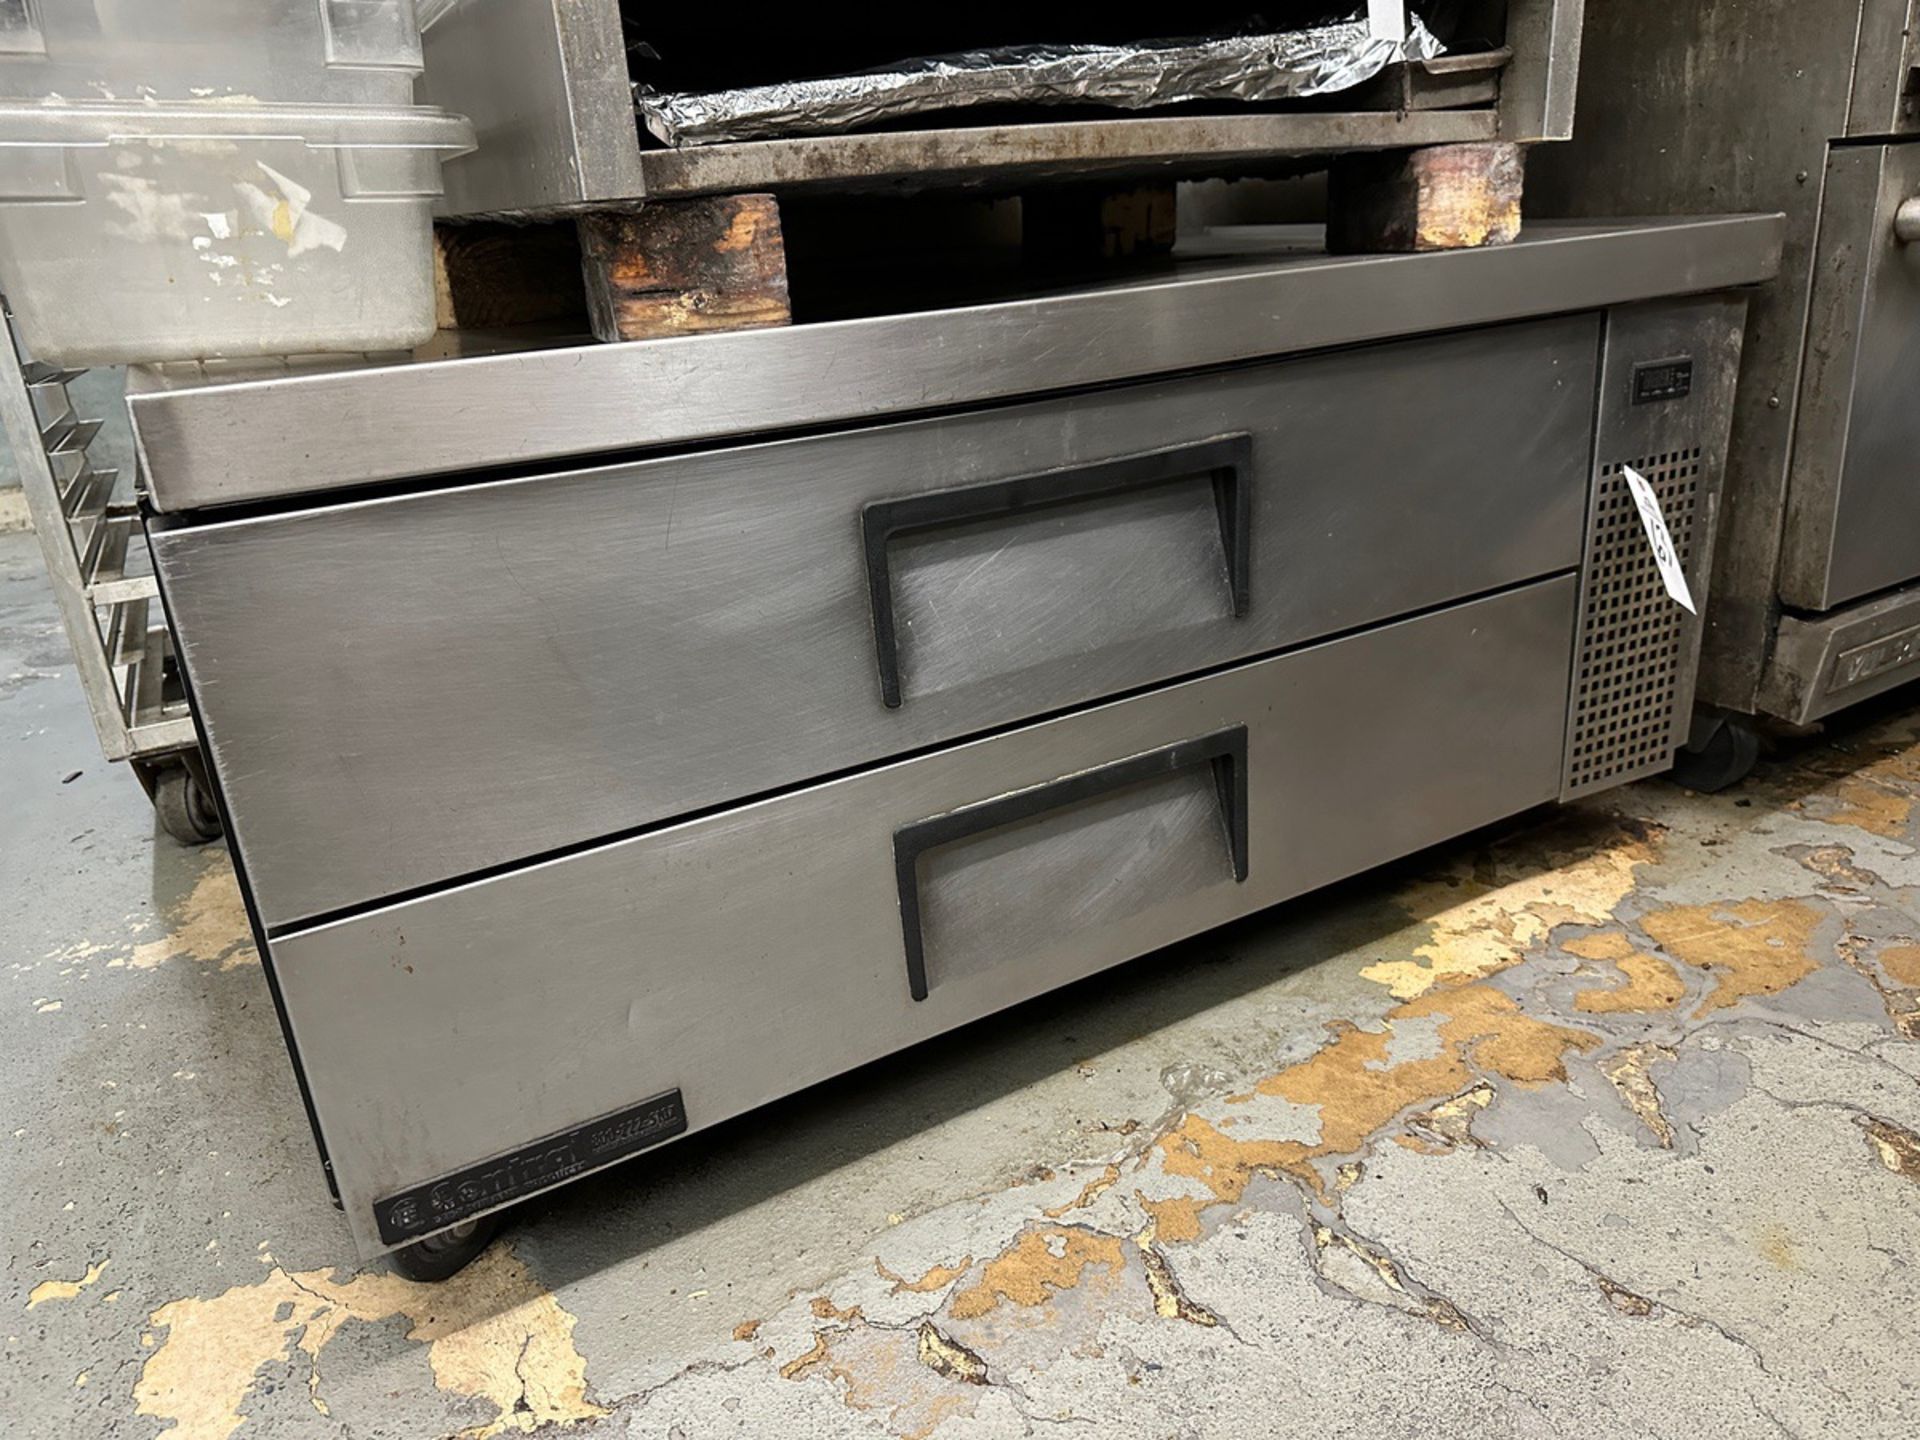 Central Restaurant Products Undercounter Refrigerated Drawers - Subj to Bulk | Rig Fee $100